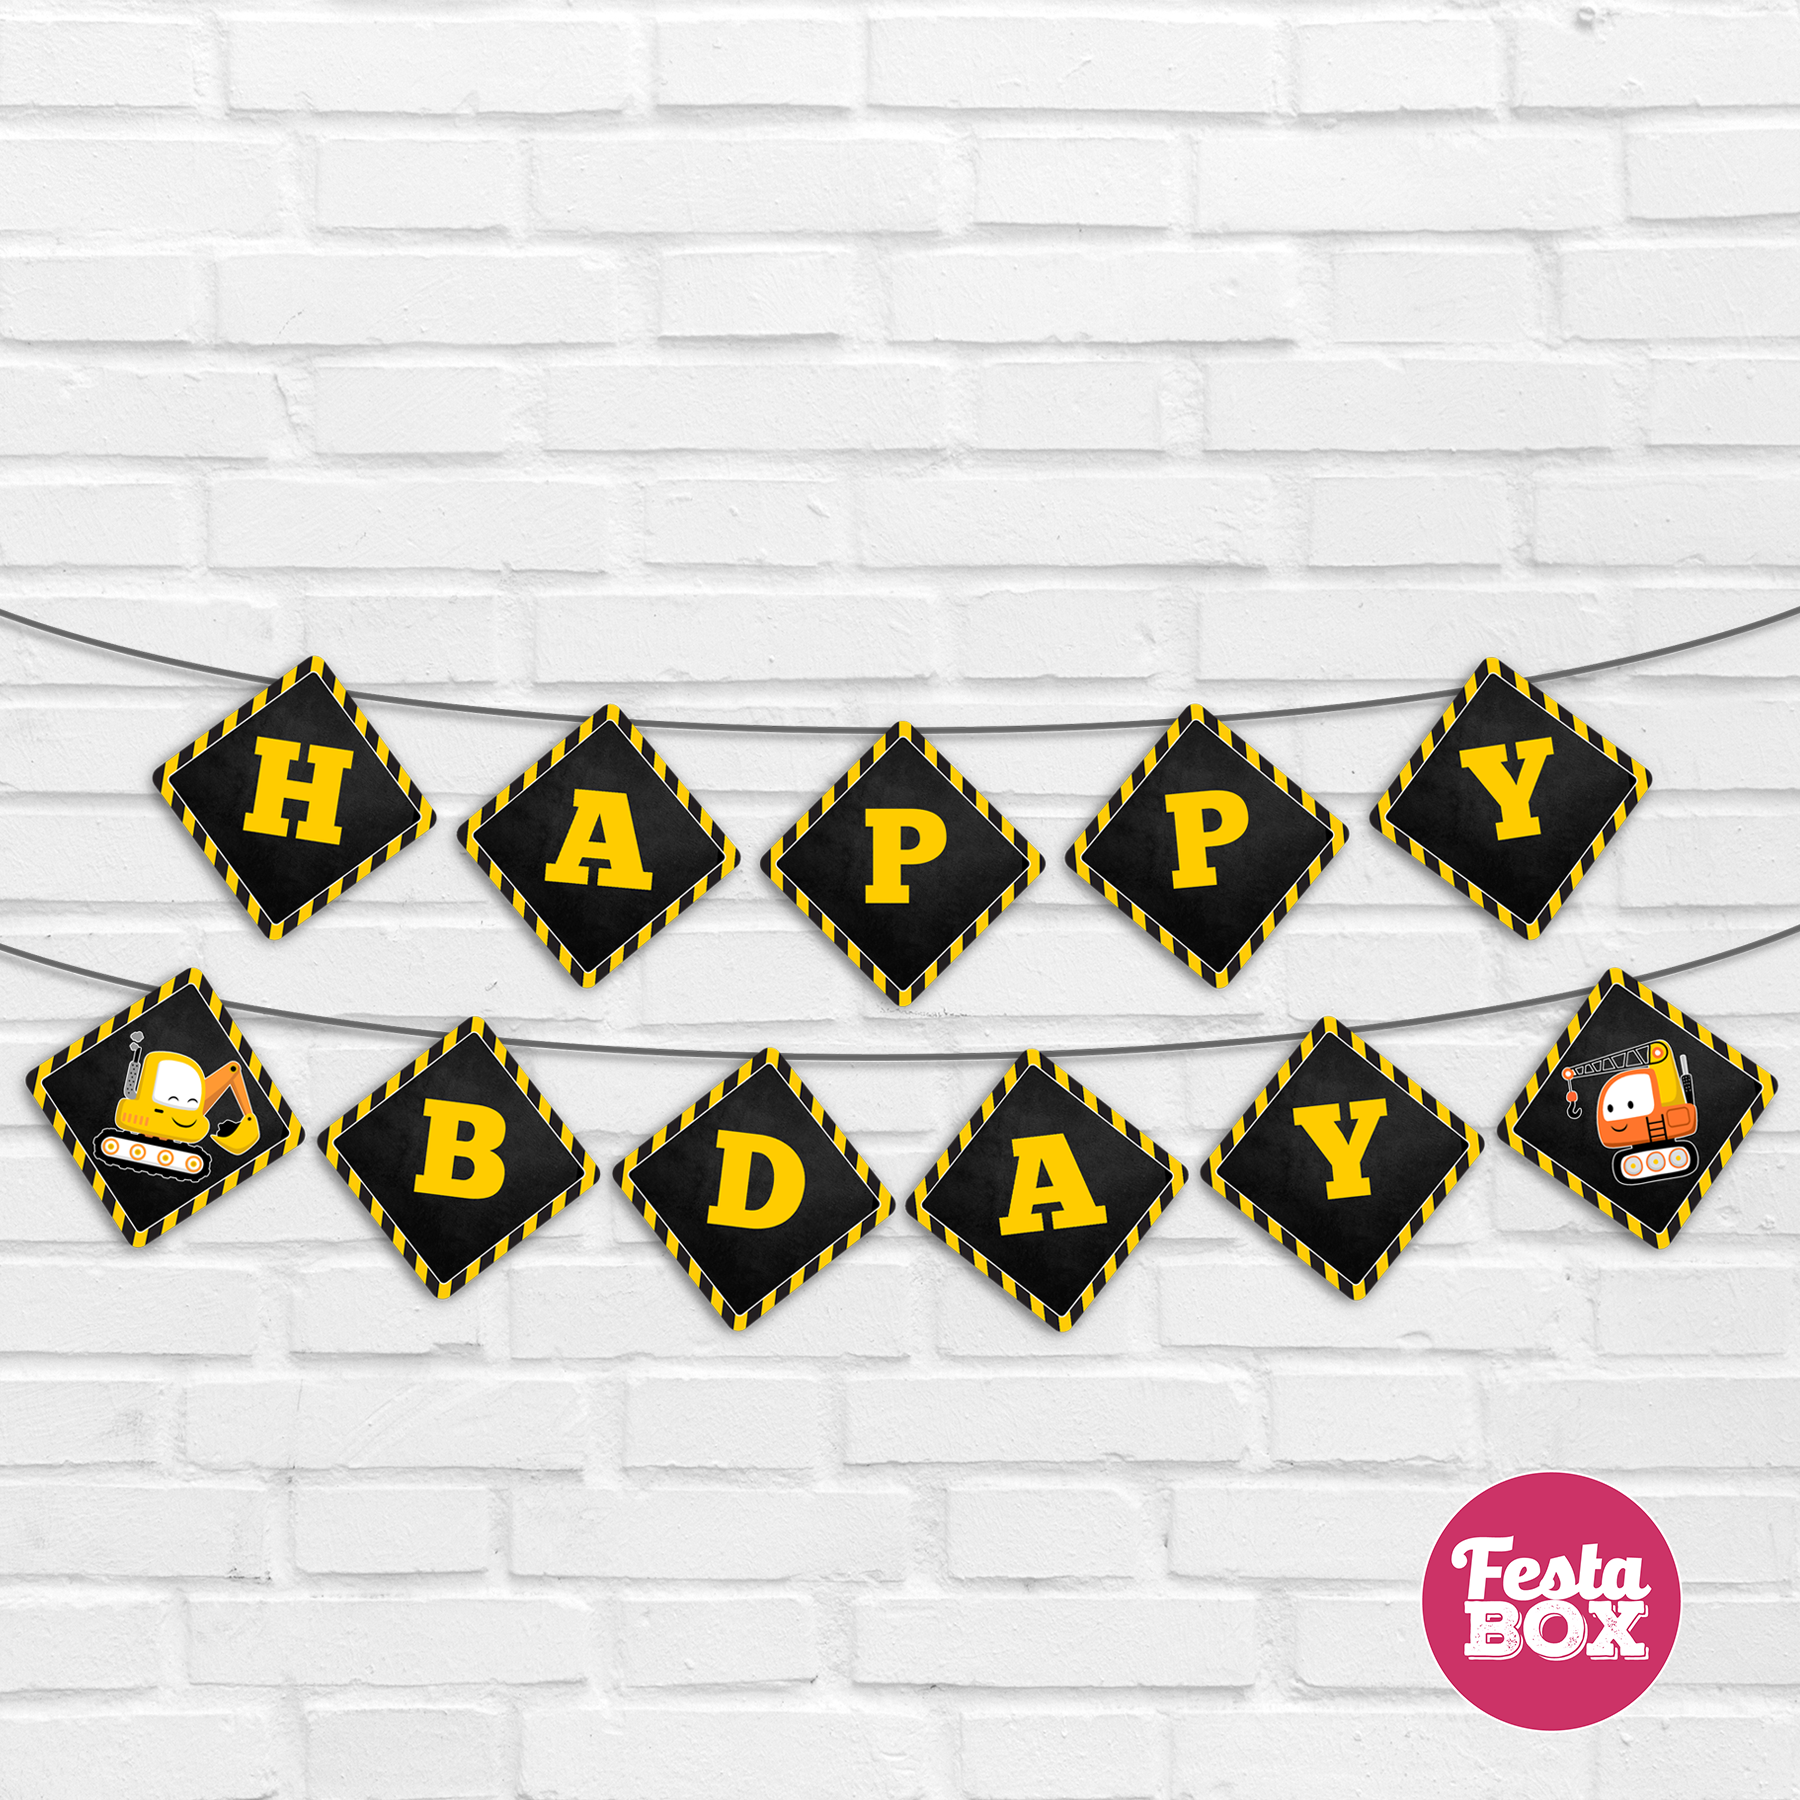 This background banner is part of the Construction Birthday Party Theme Collection by Festabox